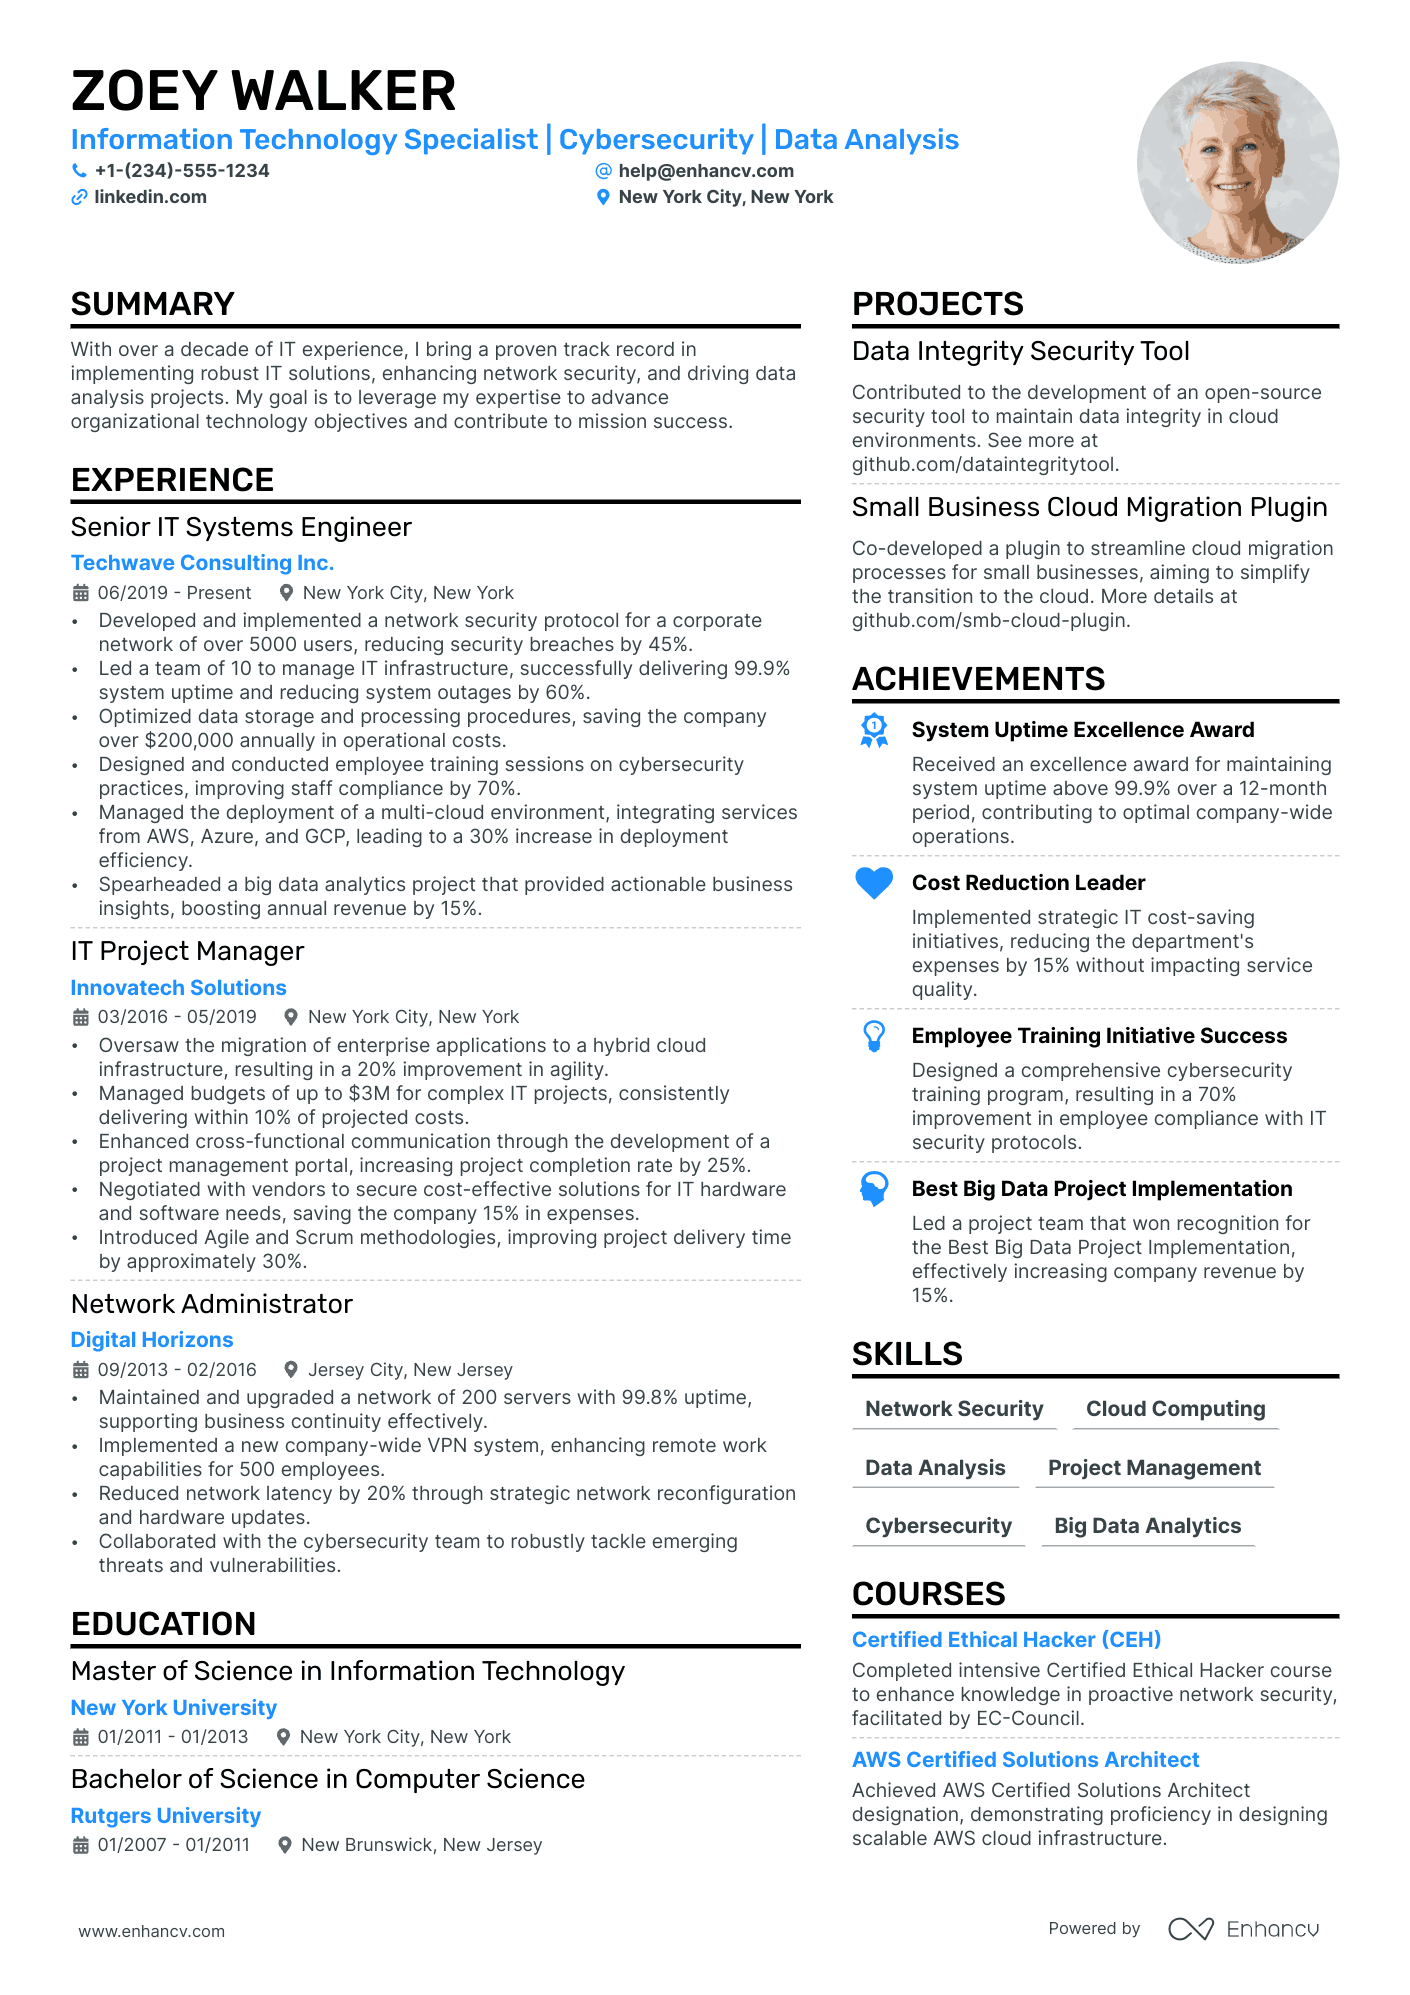 Information Technology Specialist | Cybersecurity | Data Analysis resume example